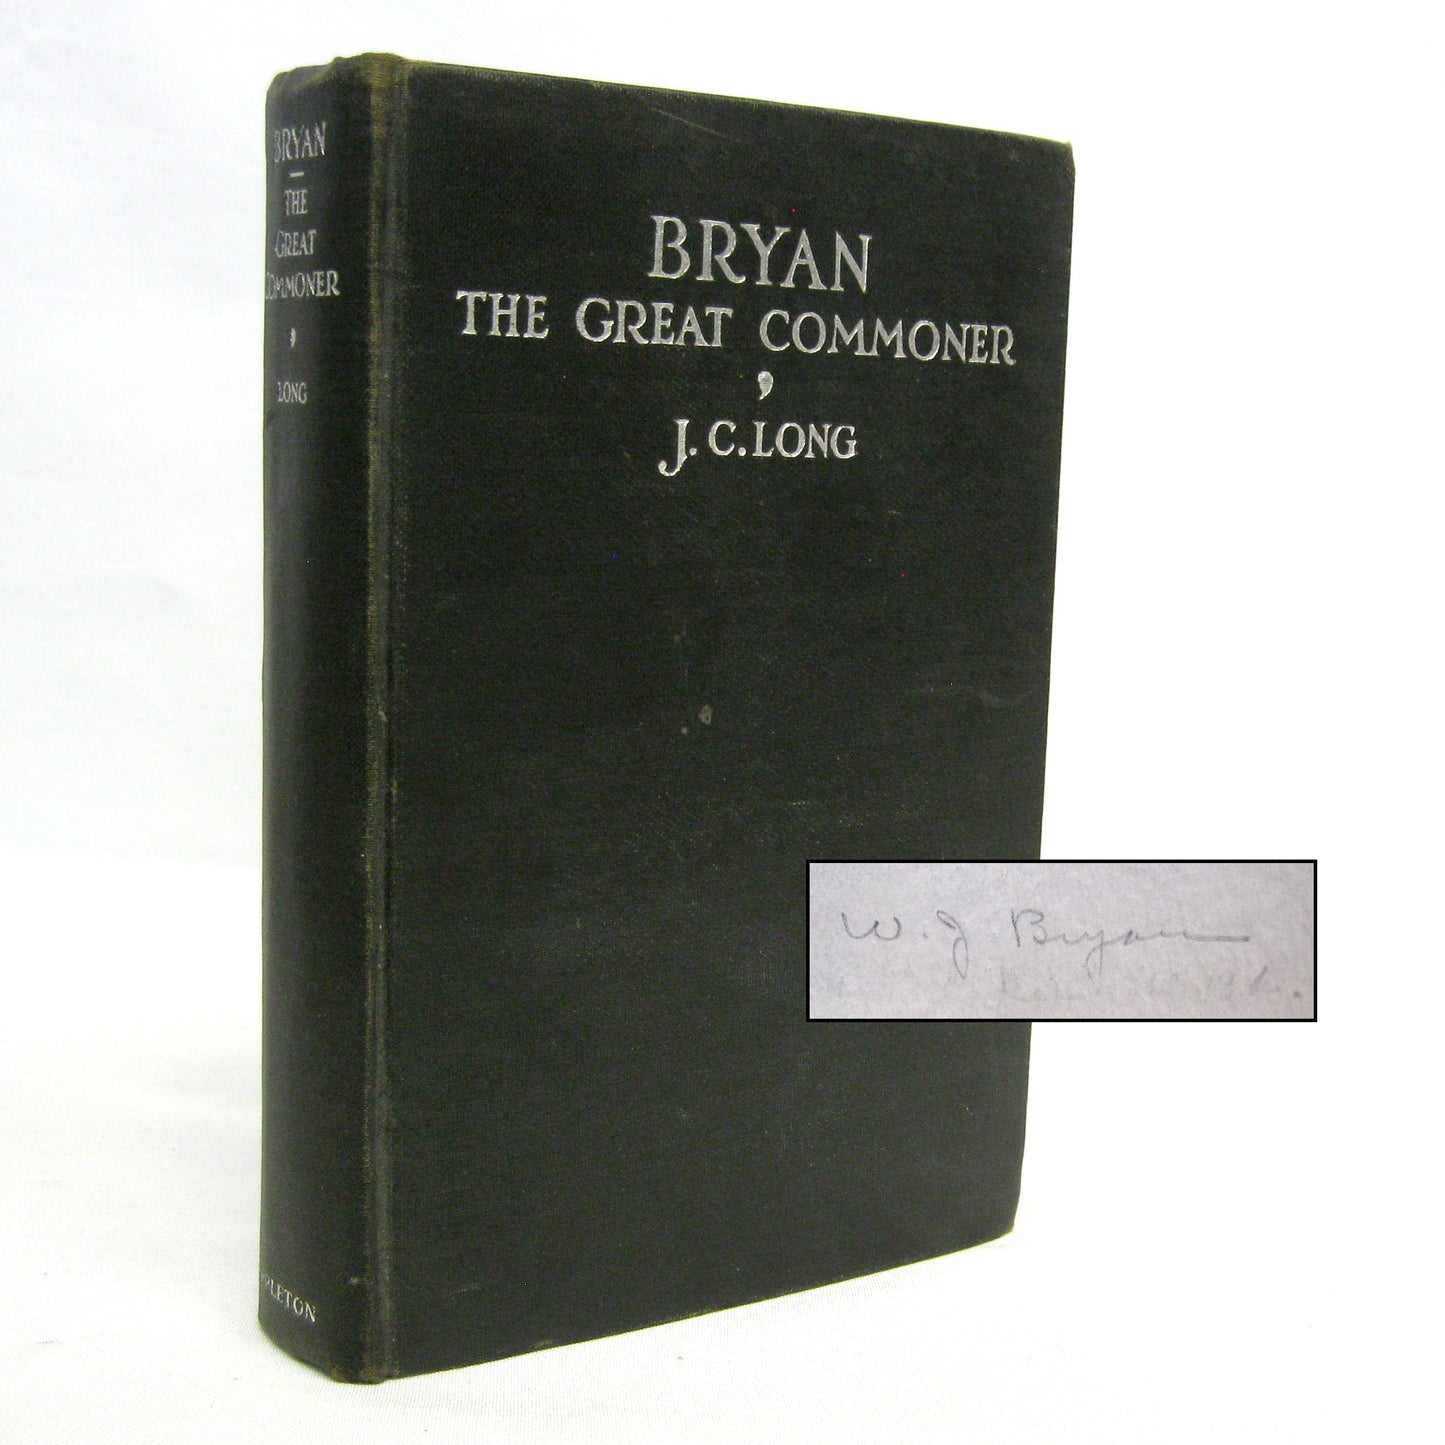 Bryan the Great Commoner by JC Long